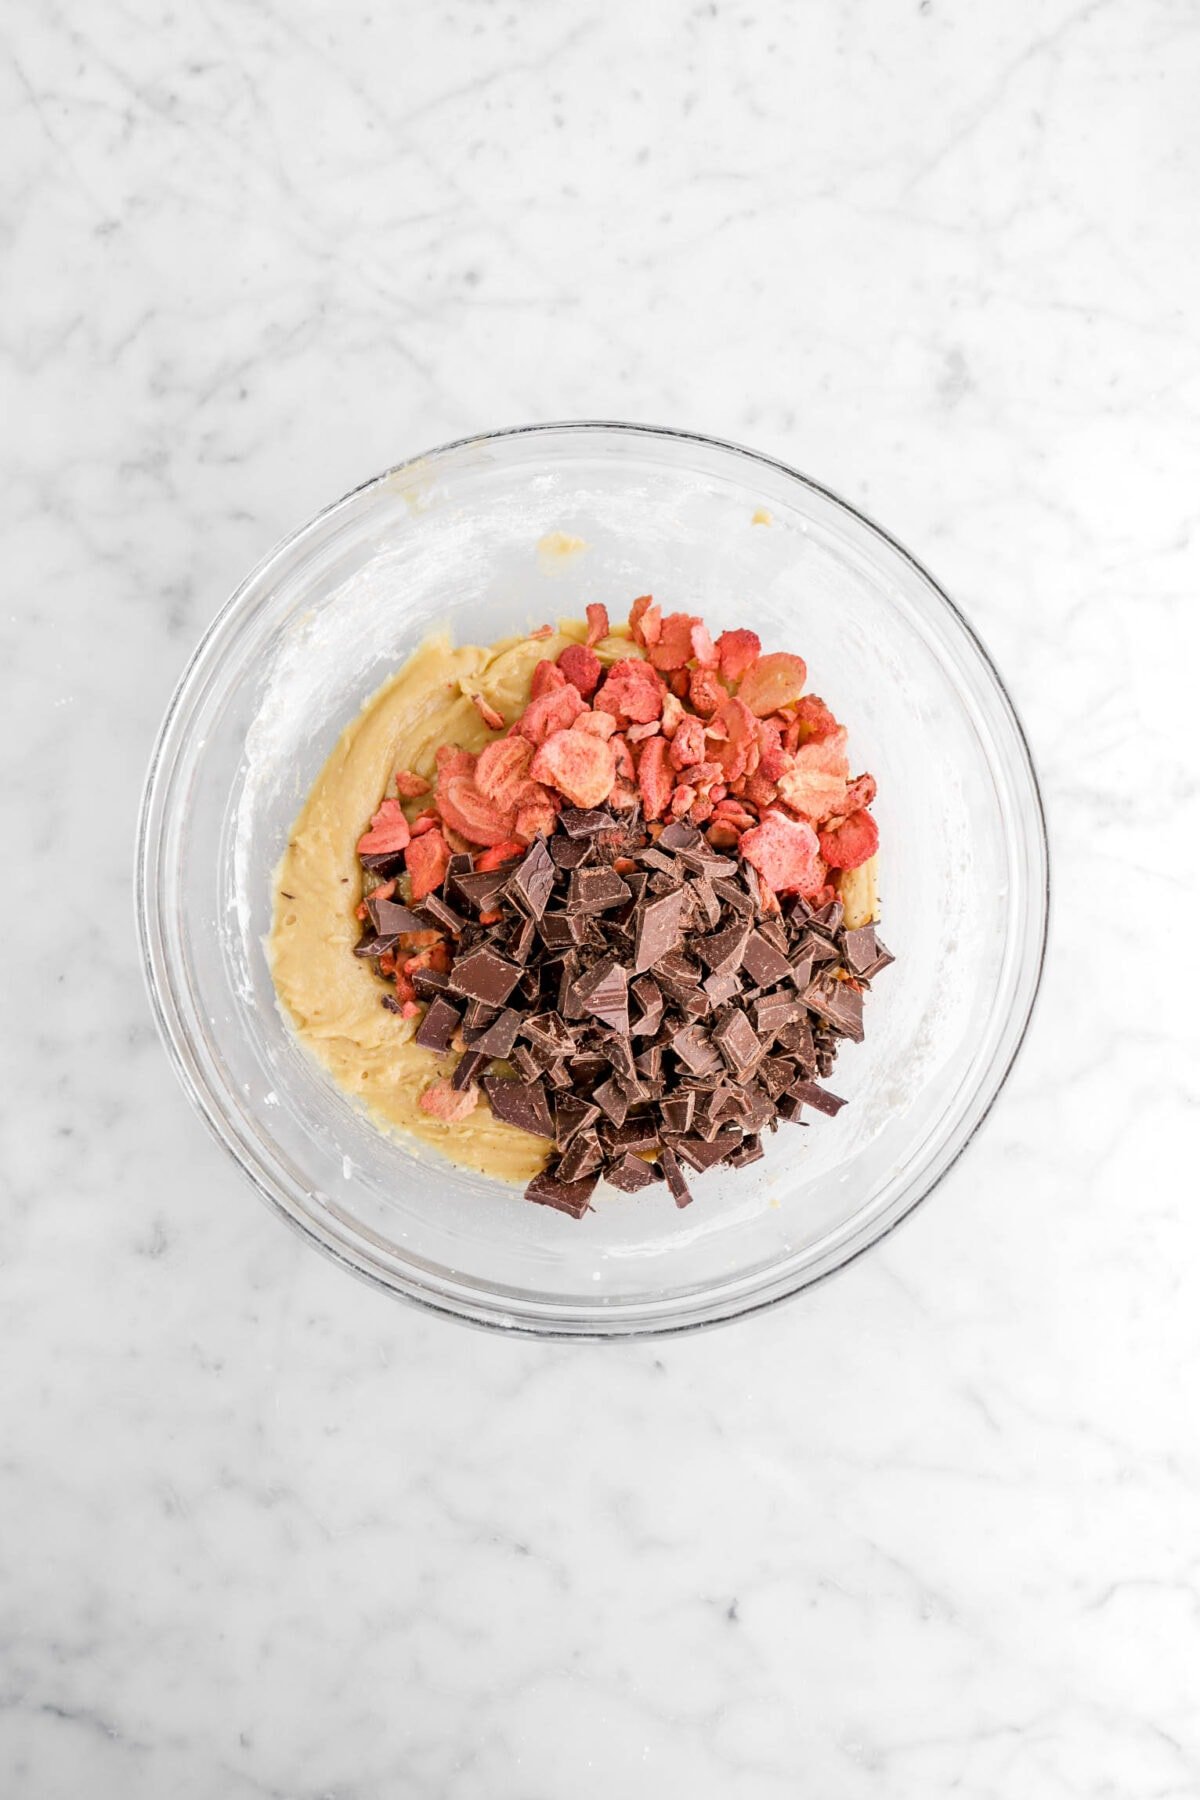 chopped chocolate and freeze-dried strawberries added on top of cookie dough in glass bowl.